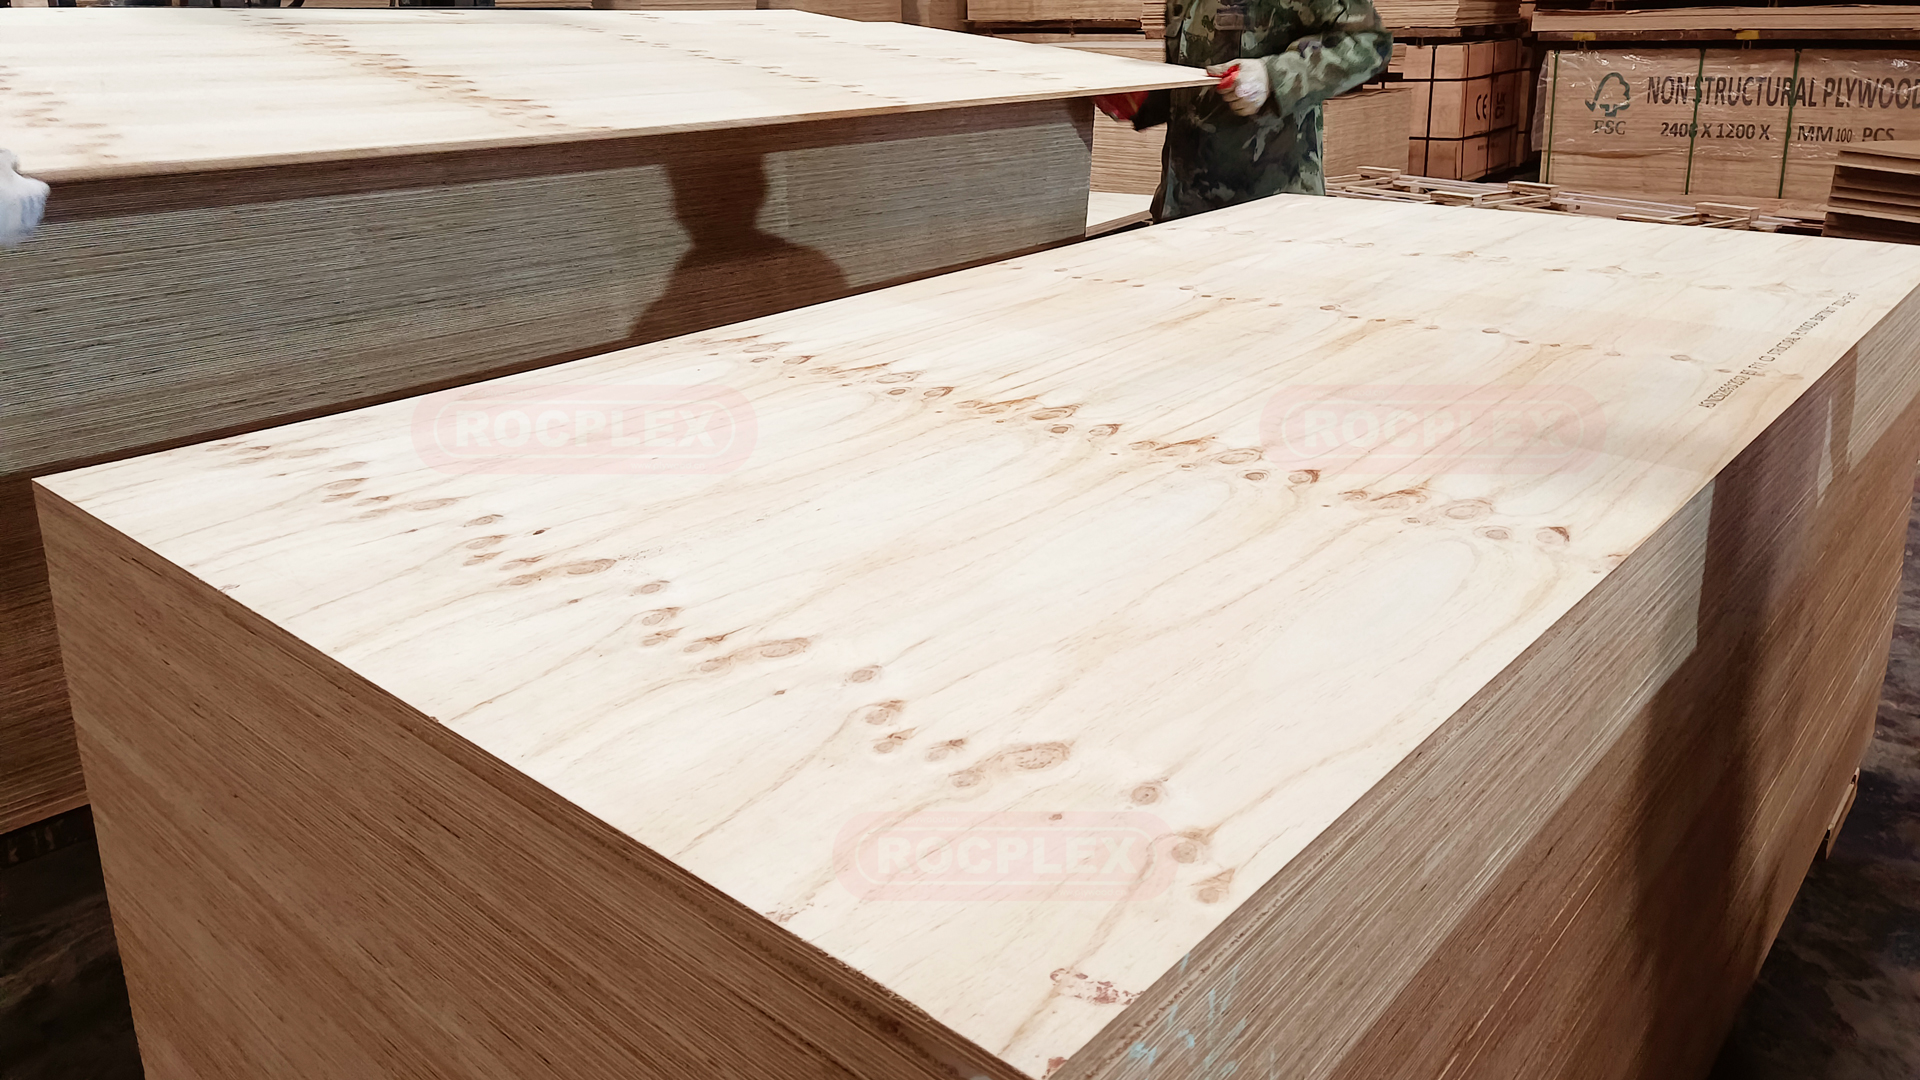 CDX Plywood: Leading the Way in Versatile Building Solutions